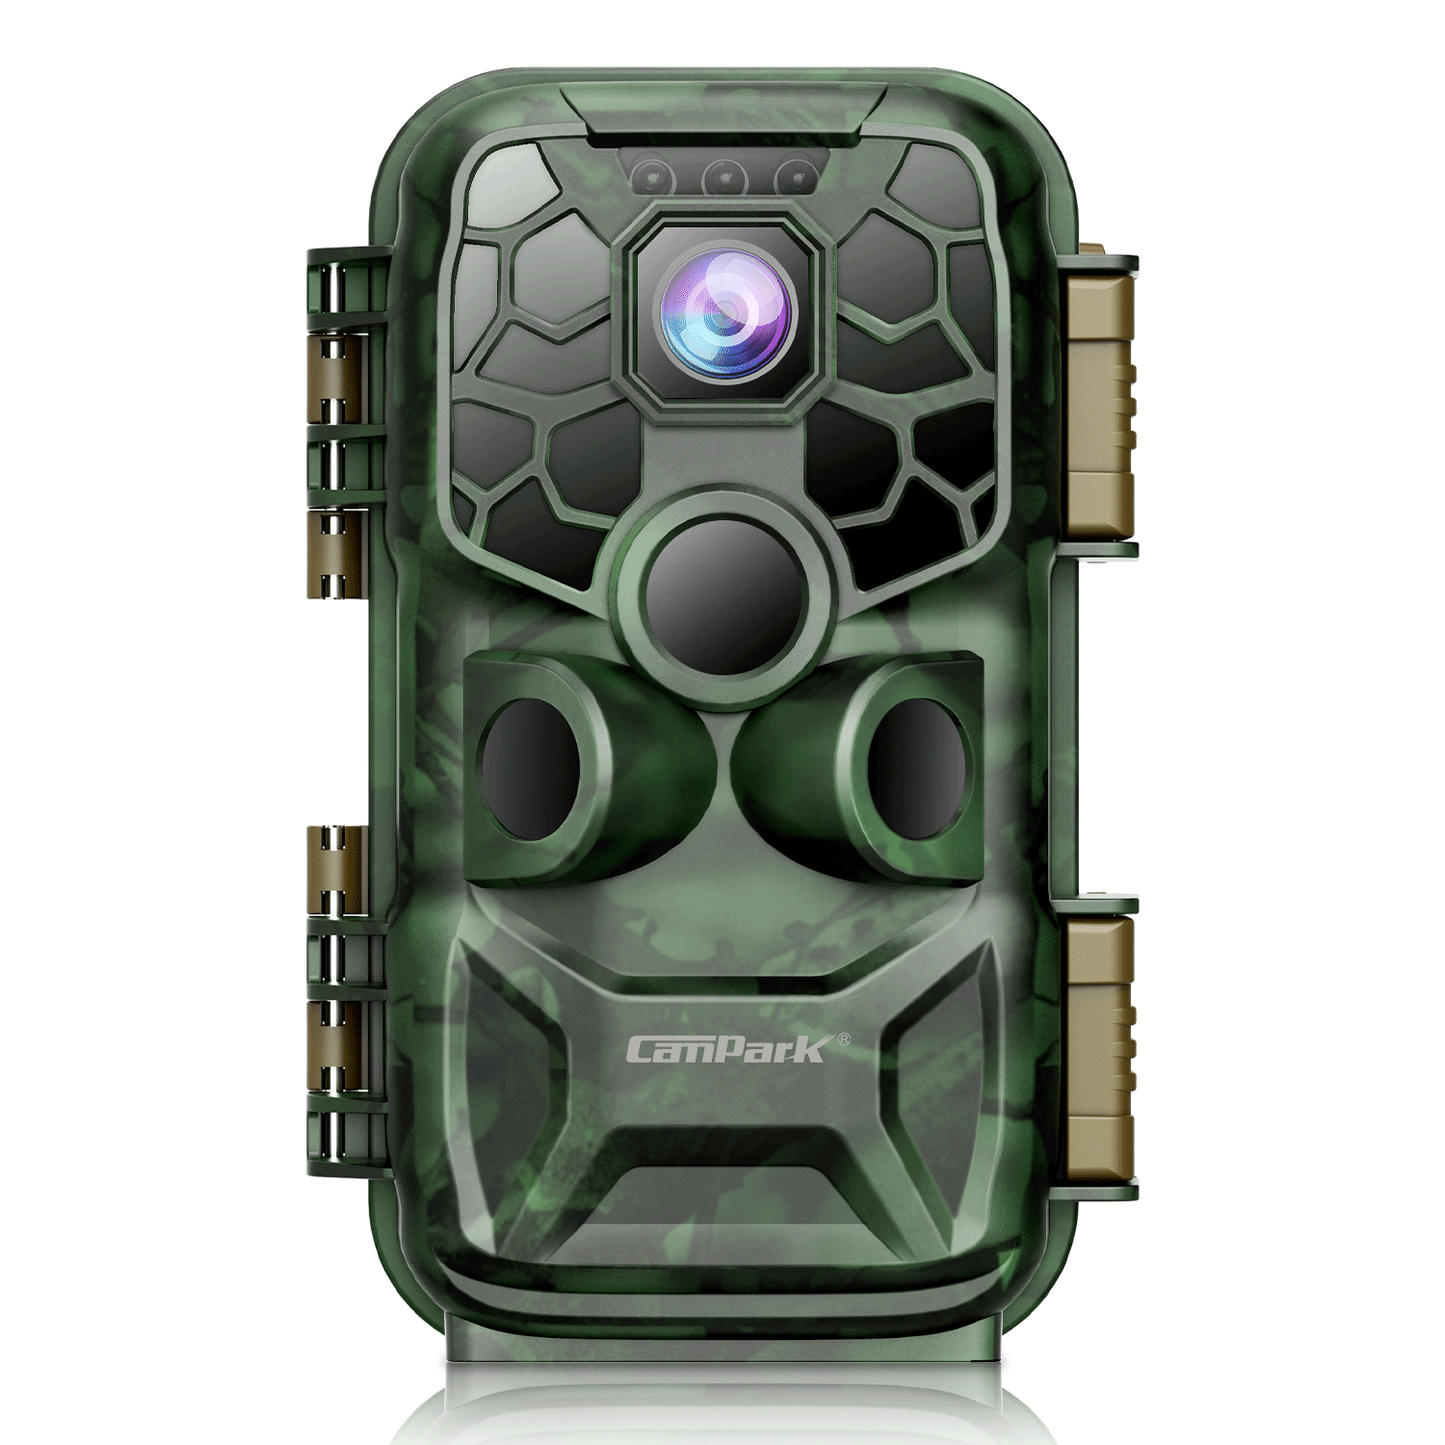 CAMPARK 42MP Native 4K 30fps Trail Game Camera WiFi Bluetooth Hunting Deer Camera with Night Vision 3 PIR Sensor Waterproof IP66 Motion Activated 120° Wide Angle Trail Cam for Wildlife Monitoring